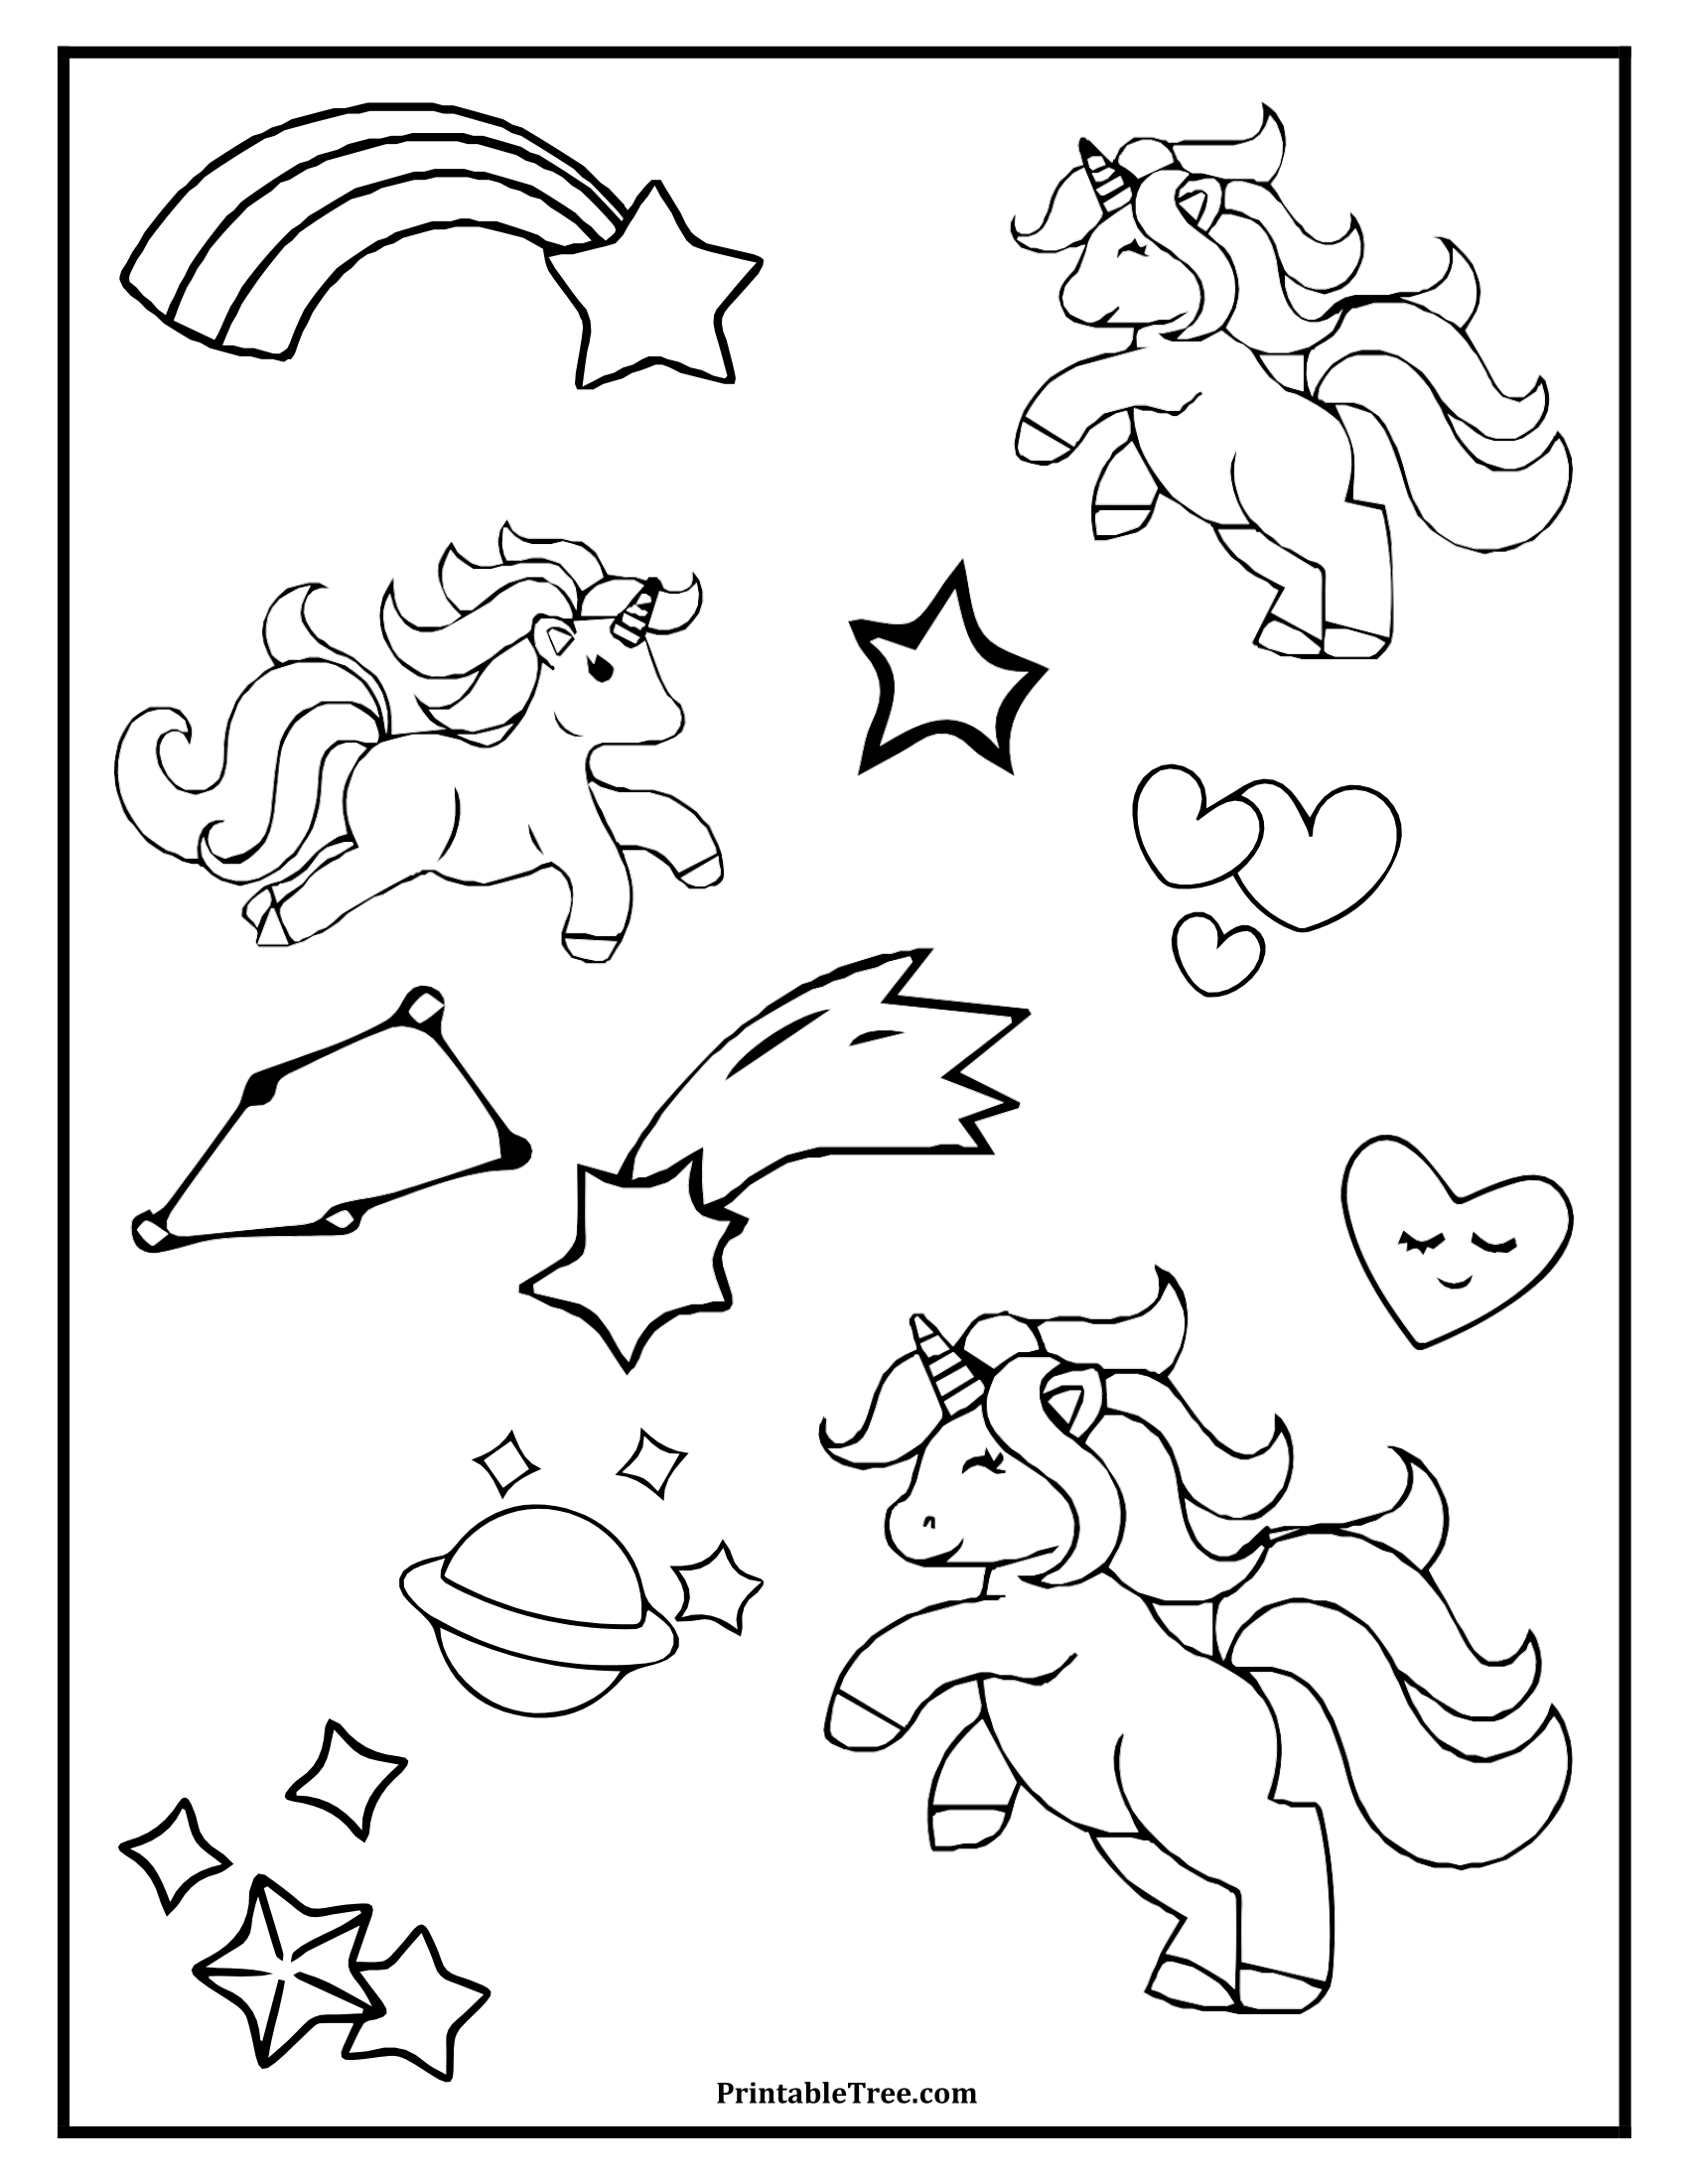 Free Printable Unicorn Coloring Pages PDF for Kids and Adults